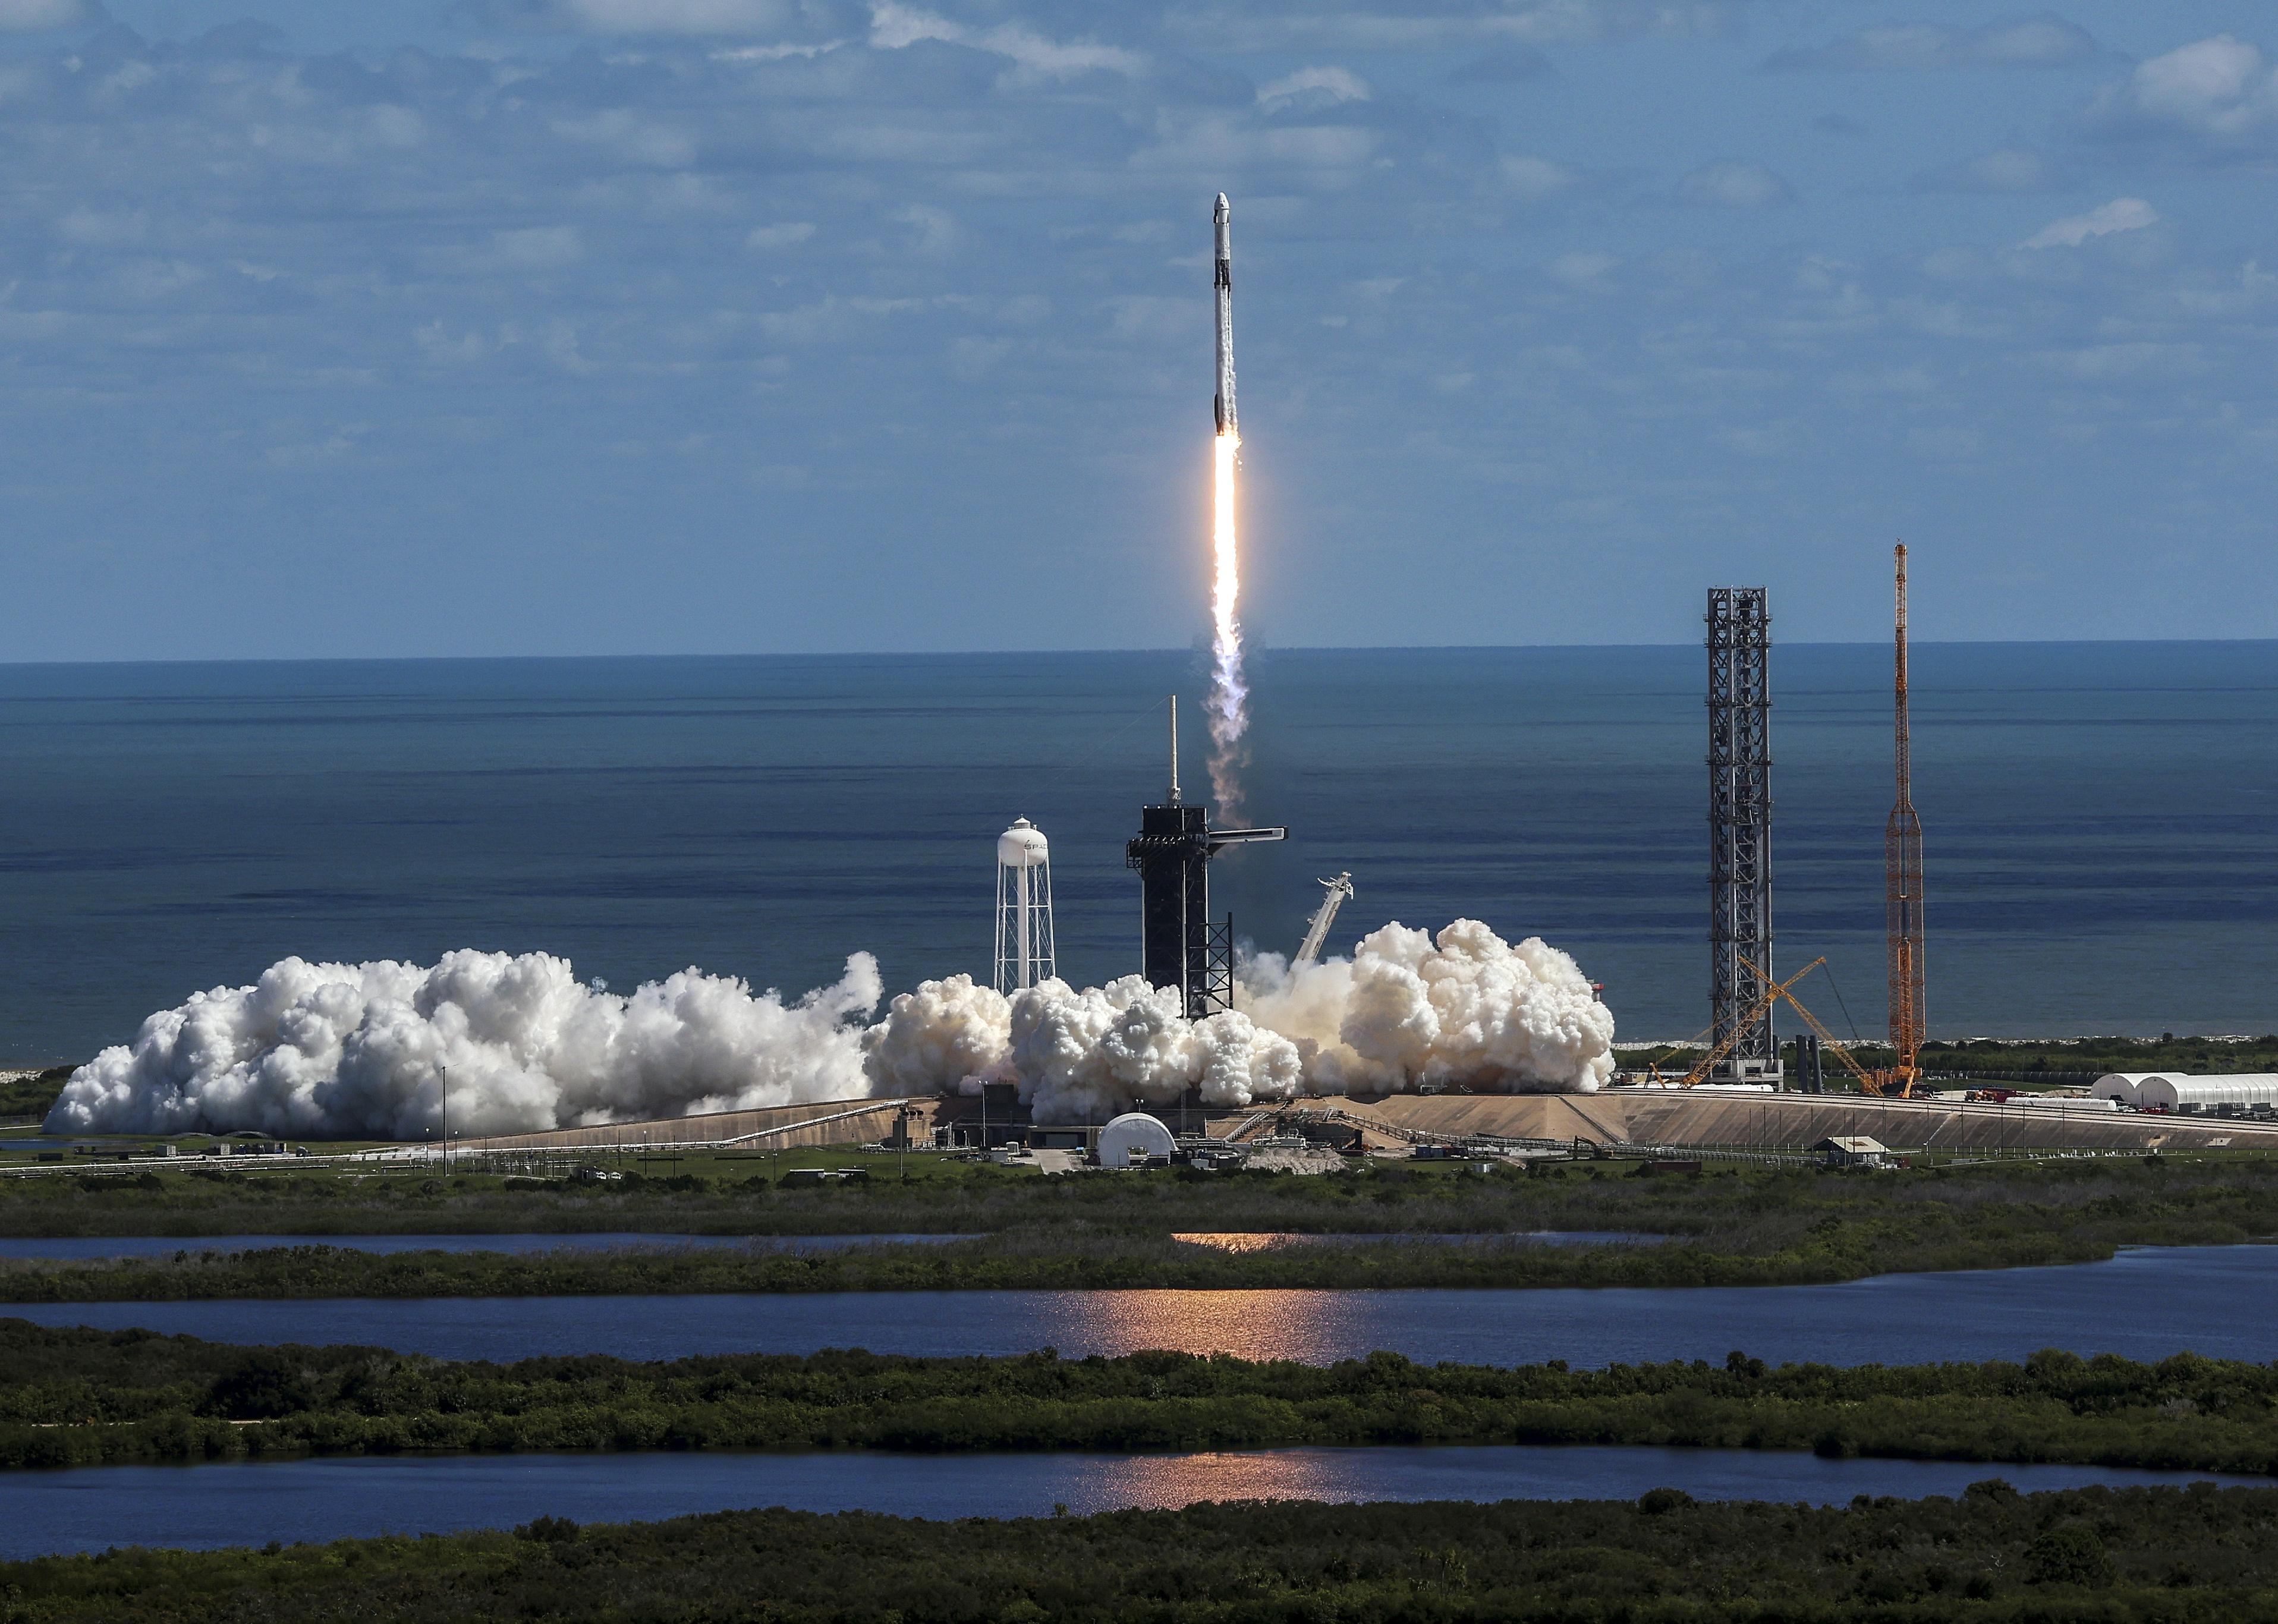 SpaceX’s Falcon 9 rocket with the Dragon spacecraft atop takes off at NASA's Kennedy Space Center in Cape Canaveral, Florida.